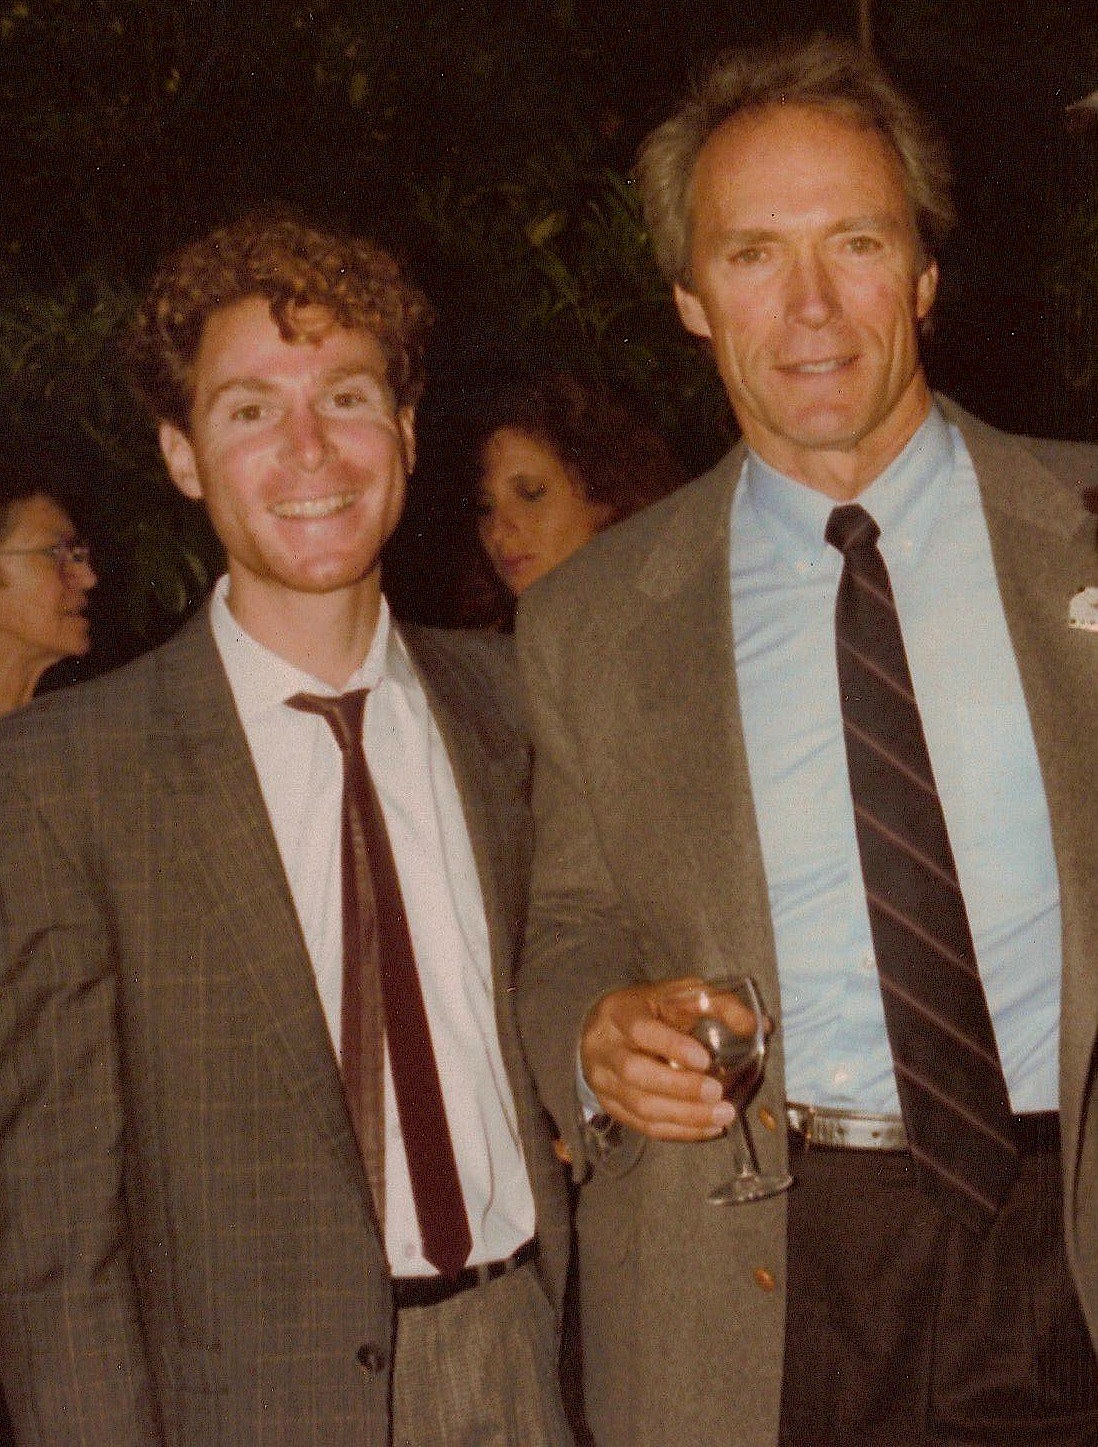 Michael Zelniker, (Bird) with director Clint Eastwood in Paris after the Cannes Film Festival.